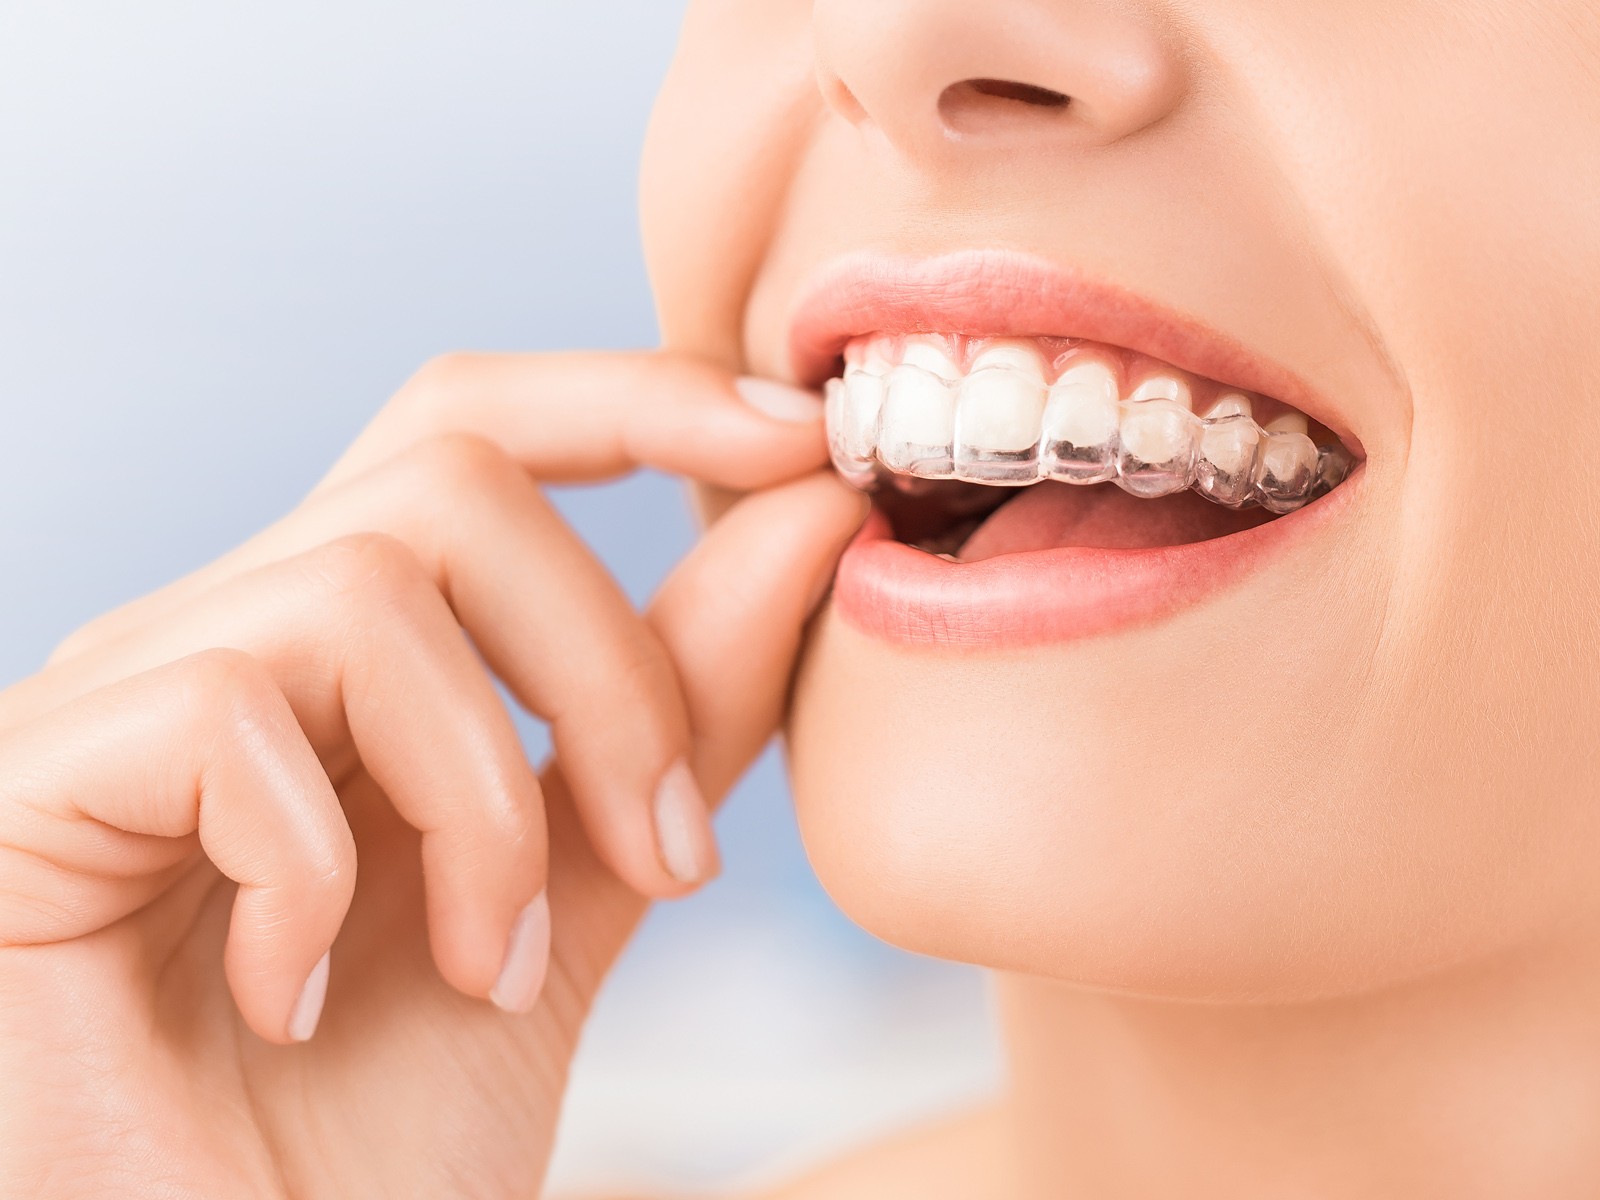 How long is the Invisalign process?